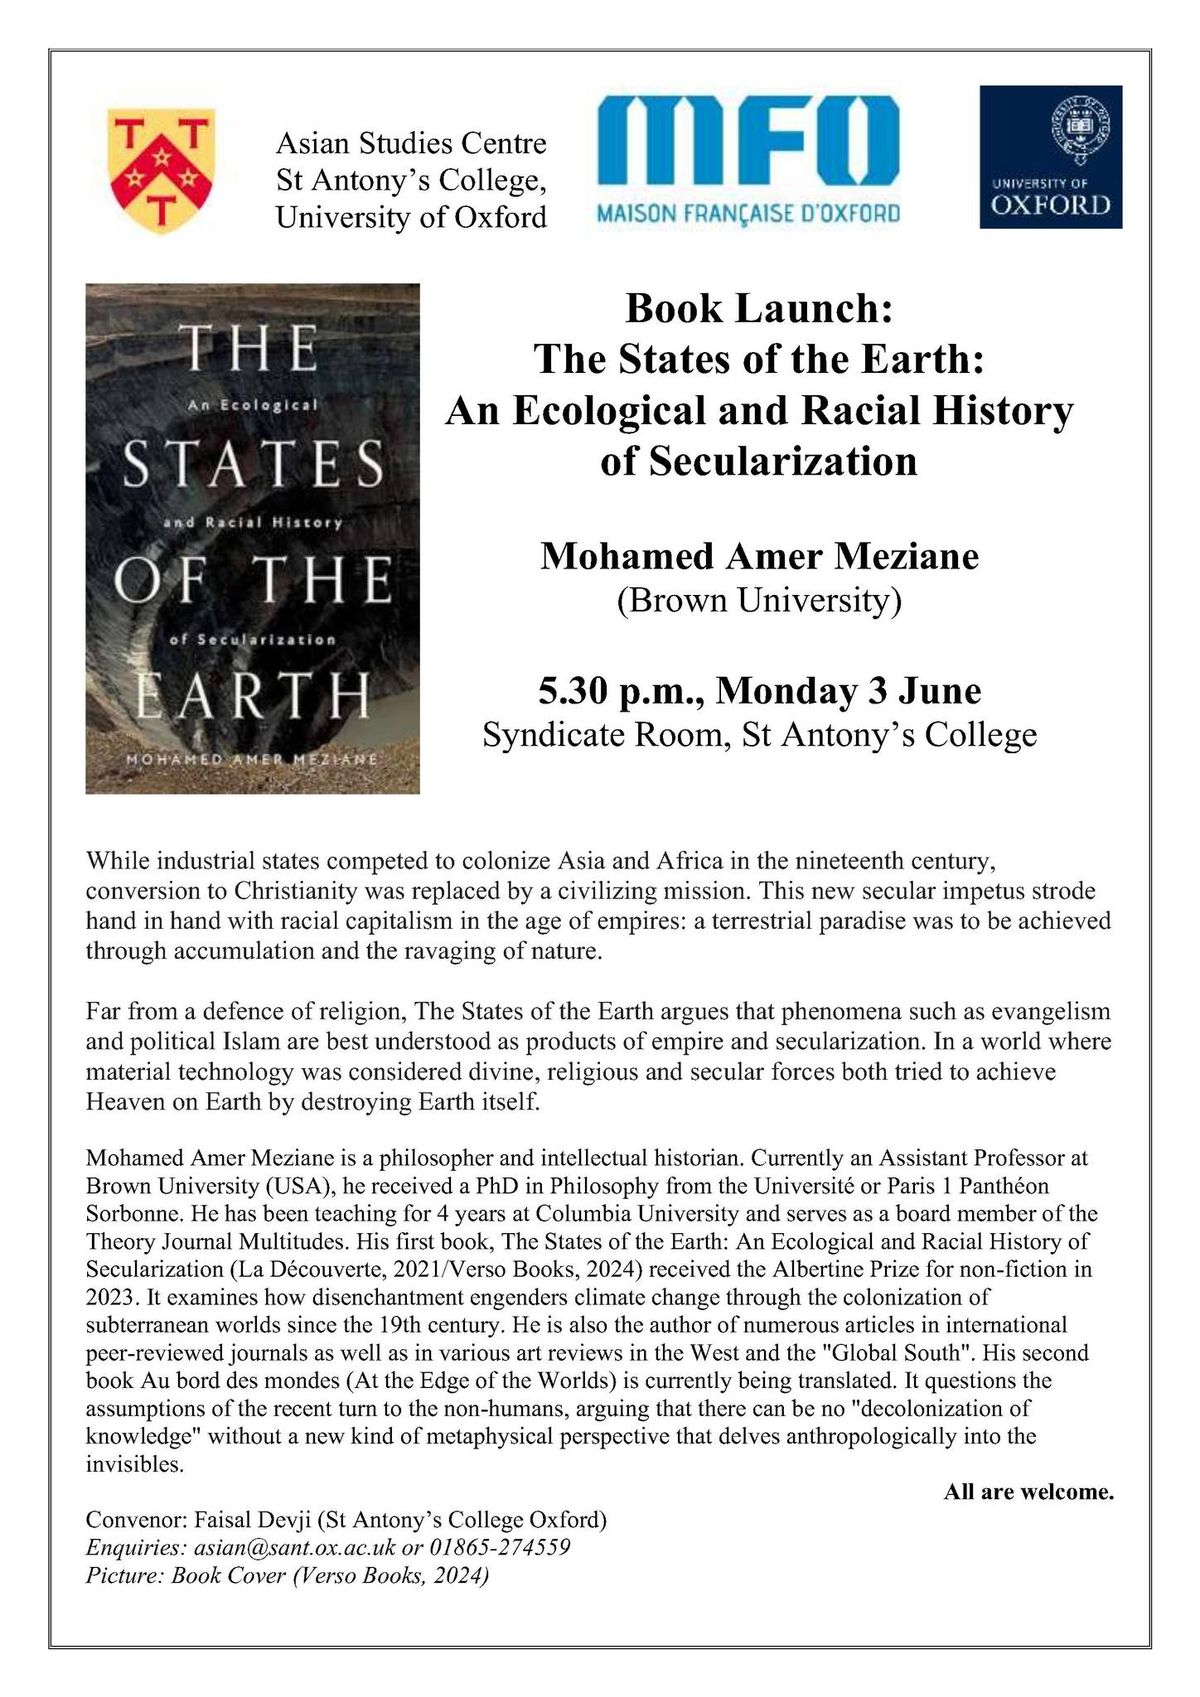 Book Launch: The States of the Earth: An Ecological and Racial History of Secularization